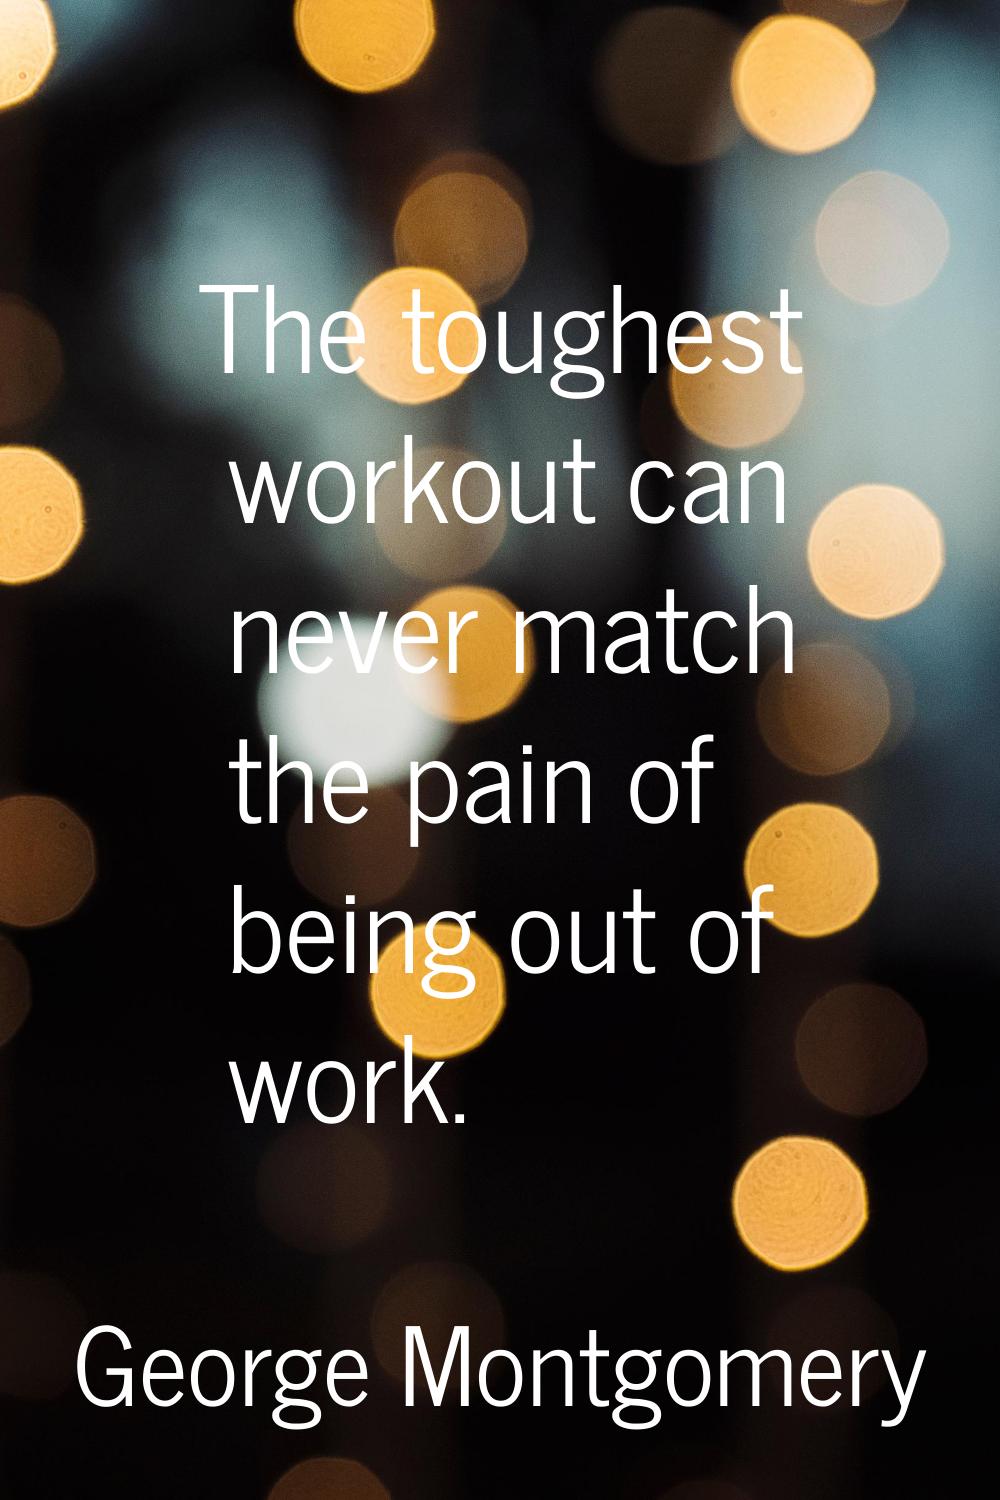 The toughest workout can never match the pain of being out of work.